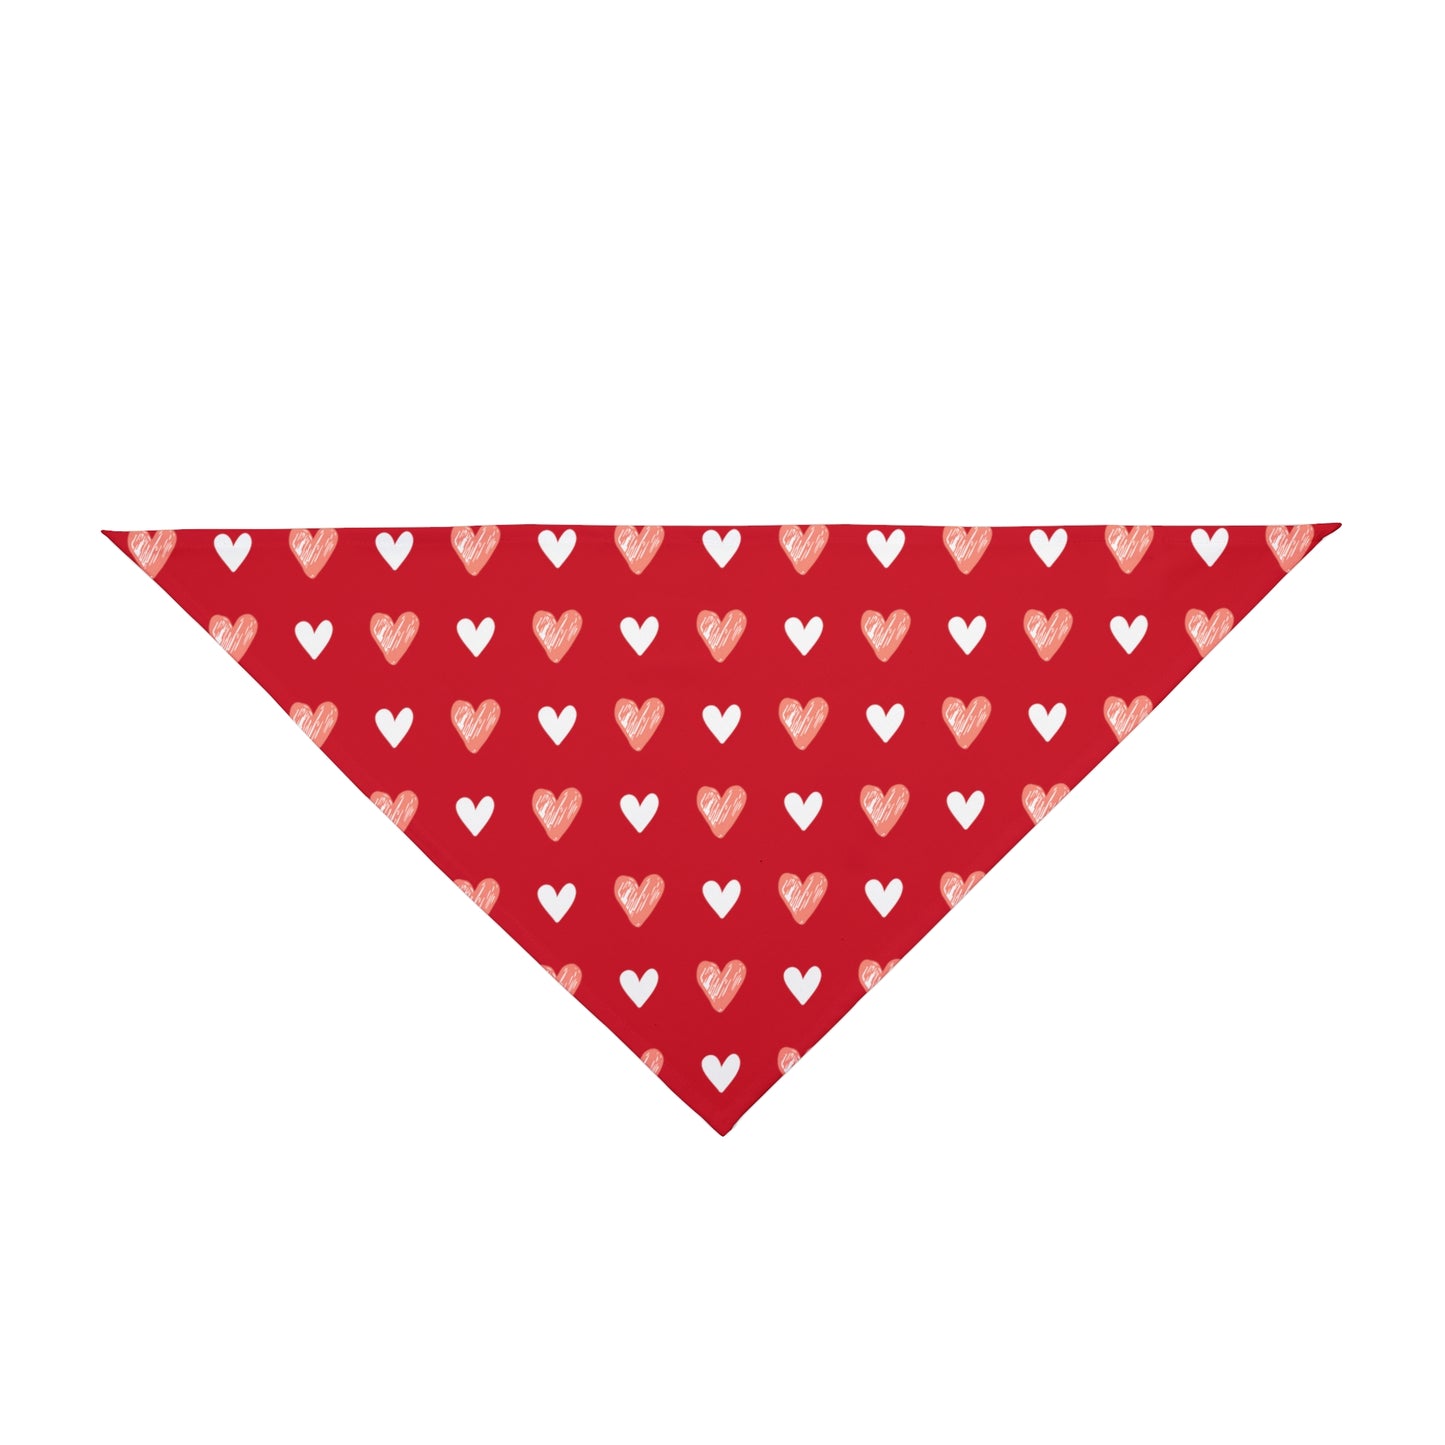 A bandana with a beautiful hearts pattern design. Bandana's Color is red